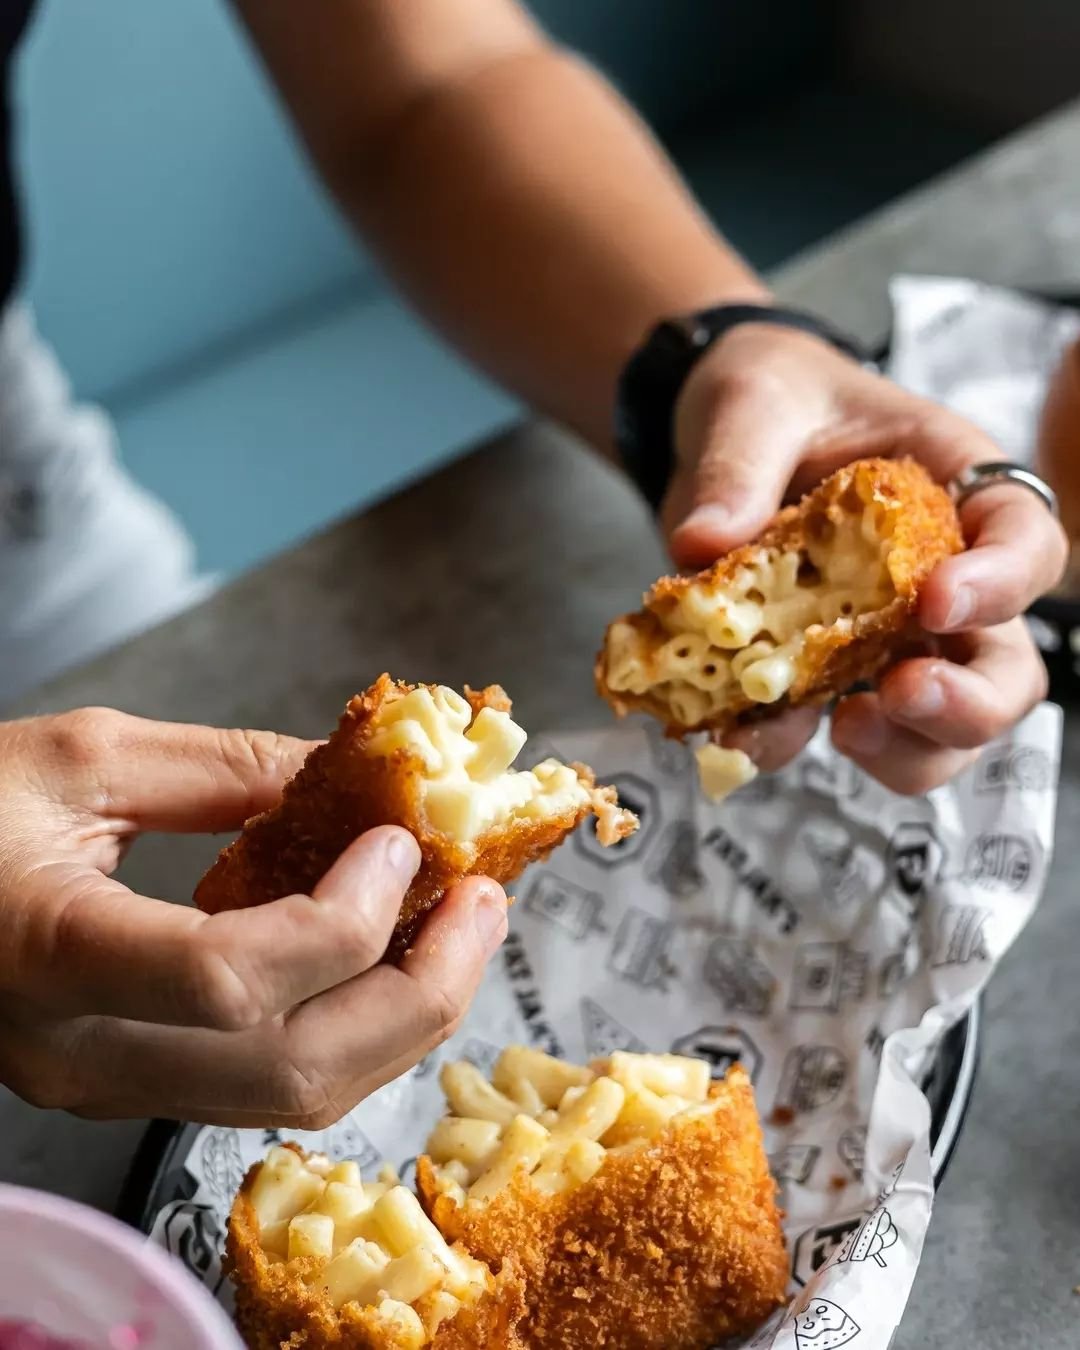 You'll have pockets full of sunshine when you order our Mac &amp; Cheese Bites!&nbsp;☀️&nbsp;

Ideally enjoyed anytime, anywhere!